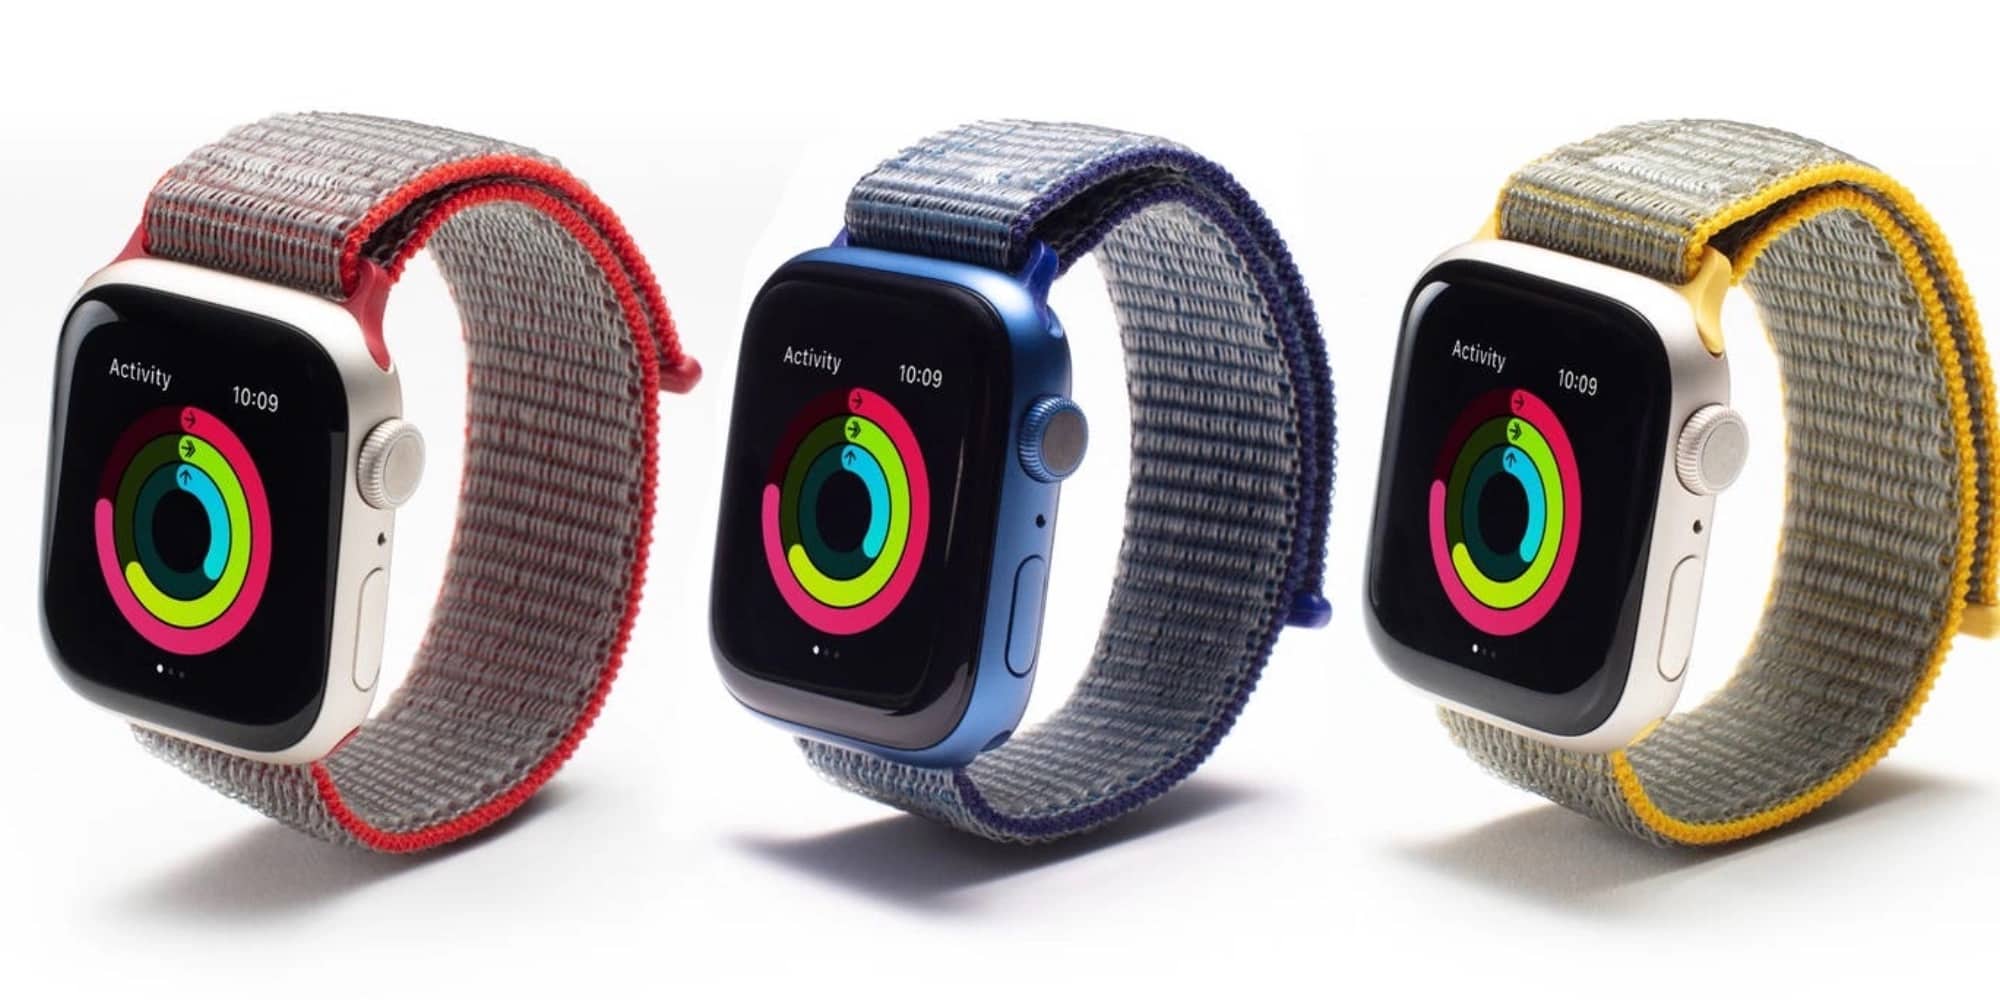 The sport bands, like Apple's, fasten with Velcro.